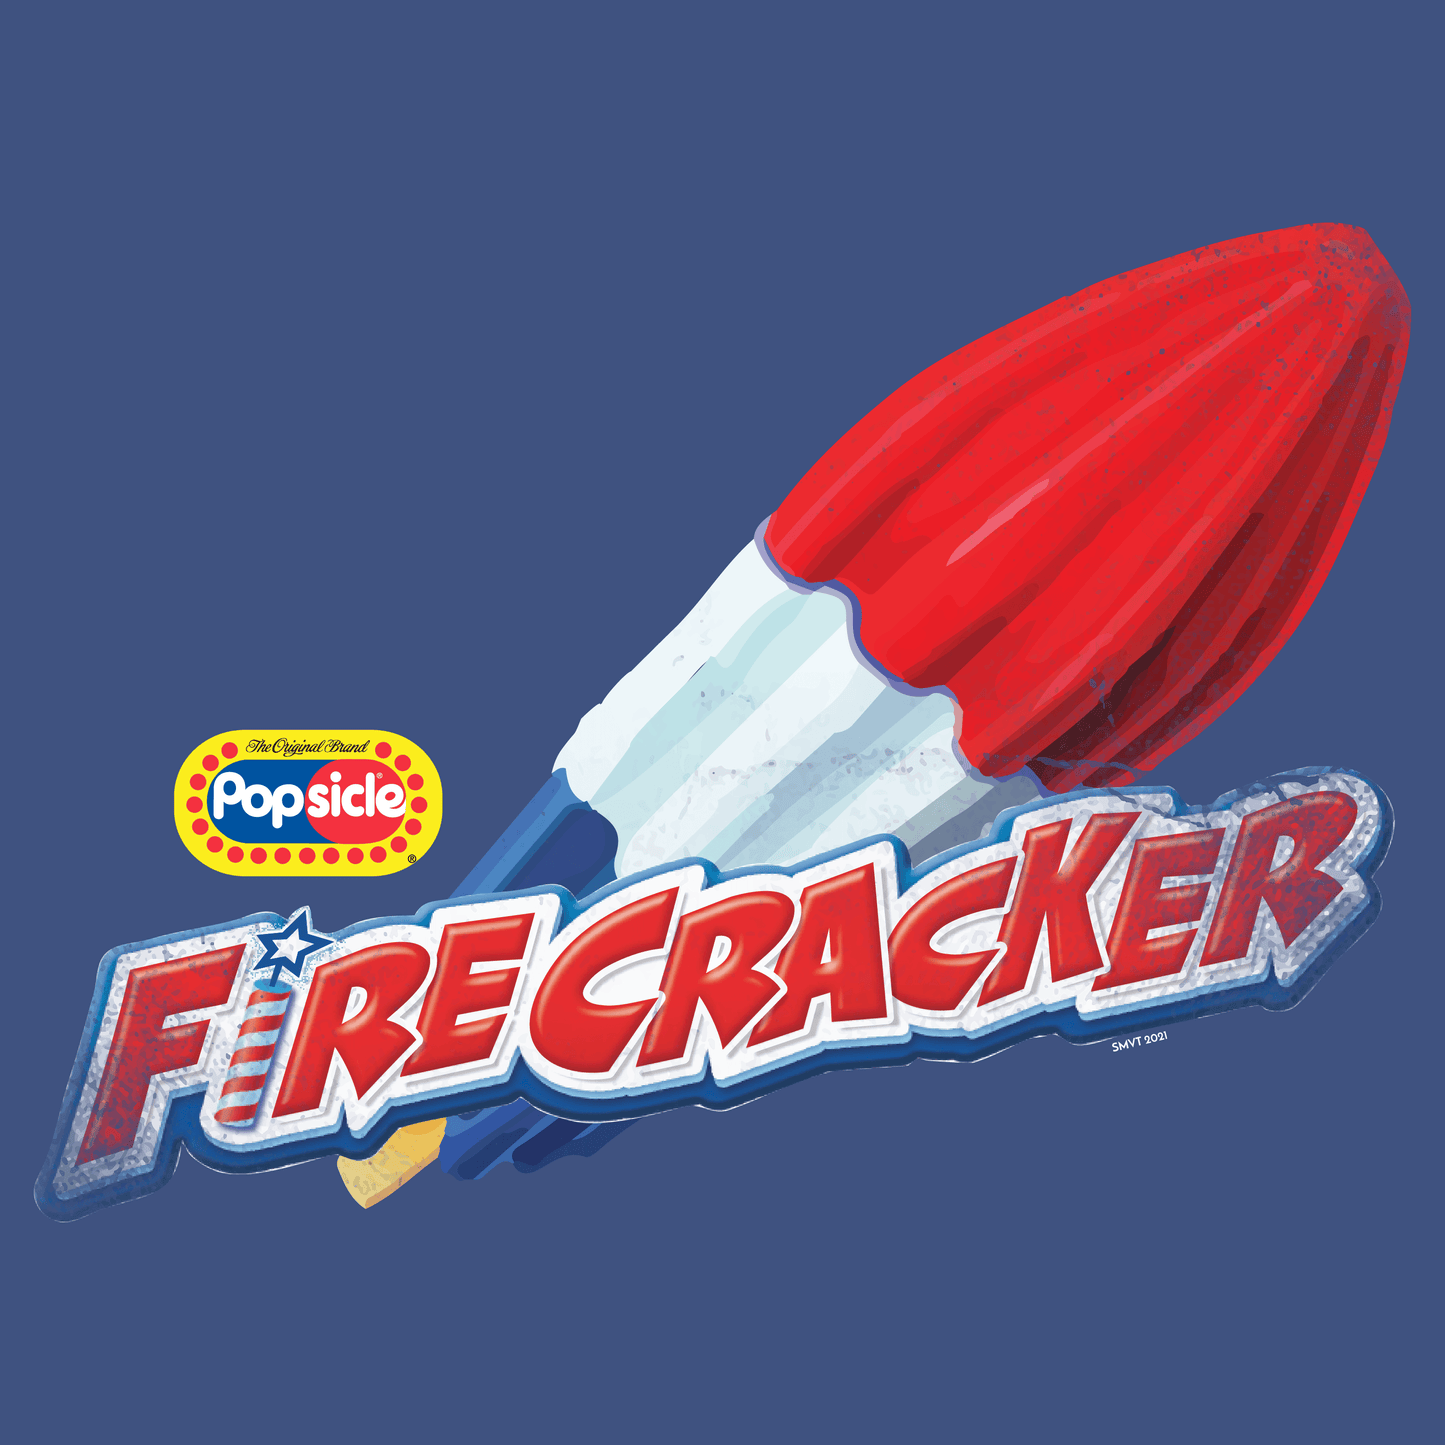 4th of July Firecracker Popsicle® T-shirt | USA Graphic Tee | American Inspired Unisex Shirt